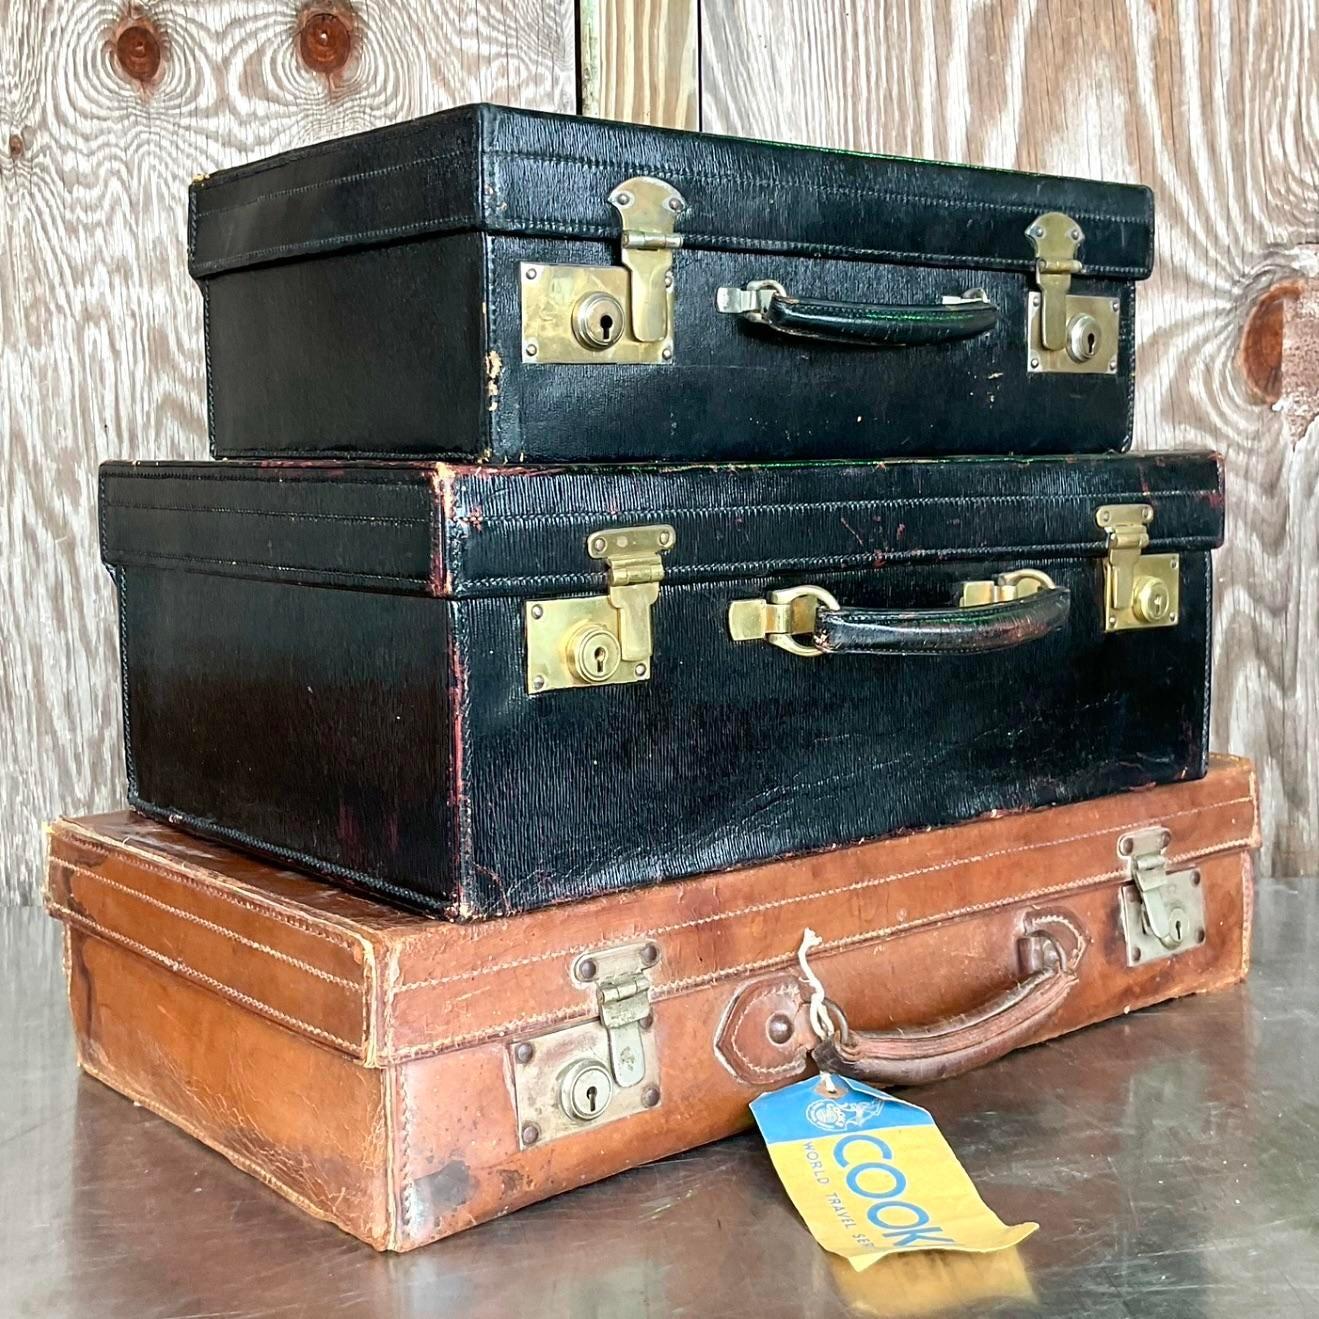 Metal Vintage Display Stack of Antique Leather Suitcases - Set of 3 For Sale